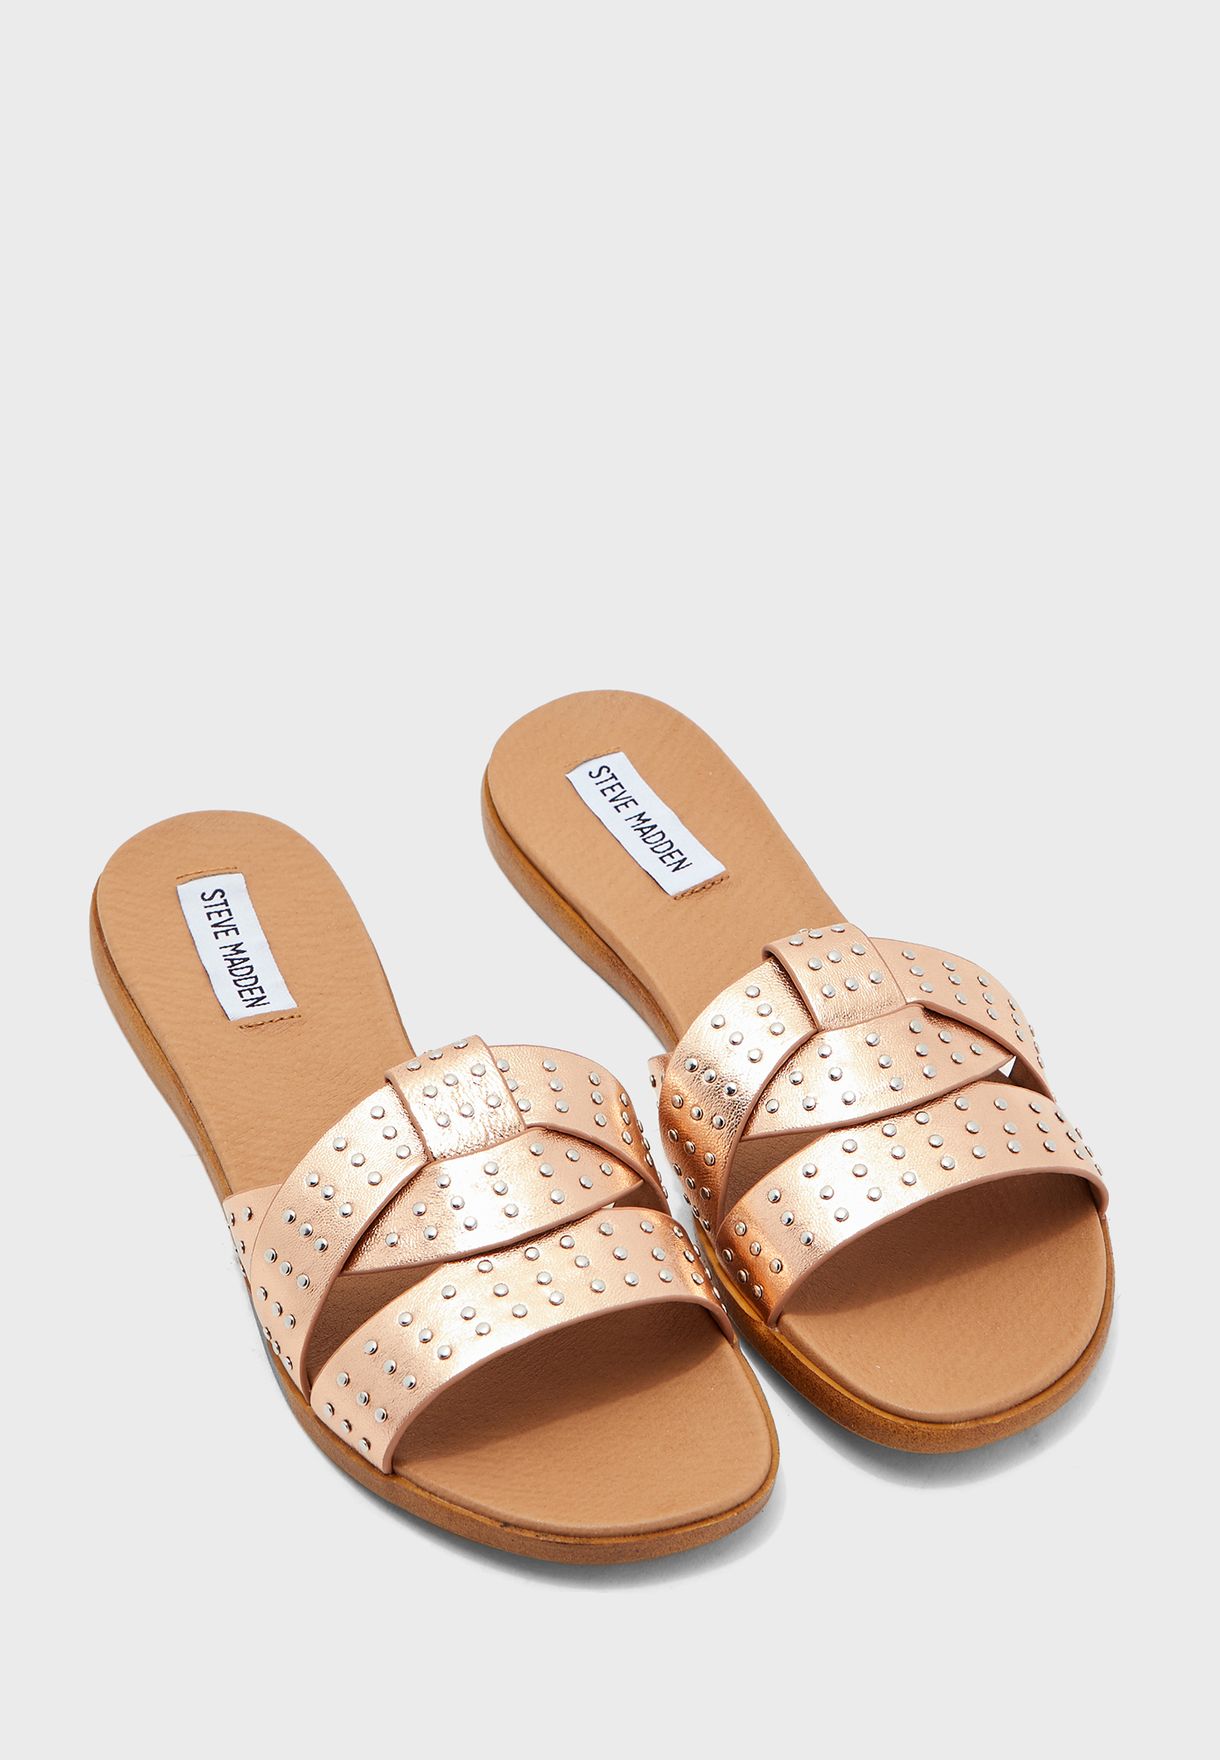 Steve Madden Colorful Sandals Top Sellers, 53% OFF | empow-her.com